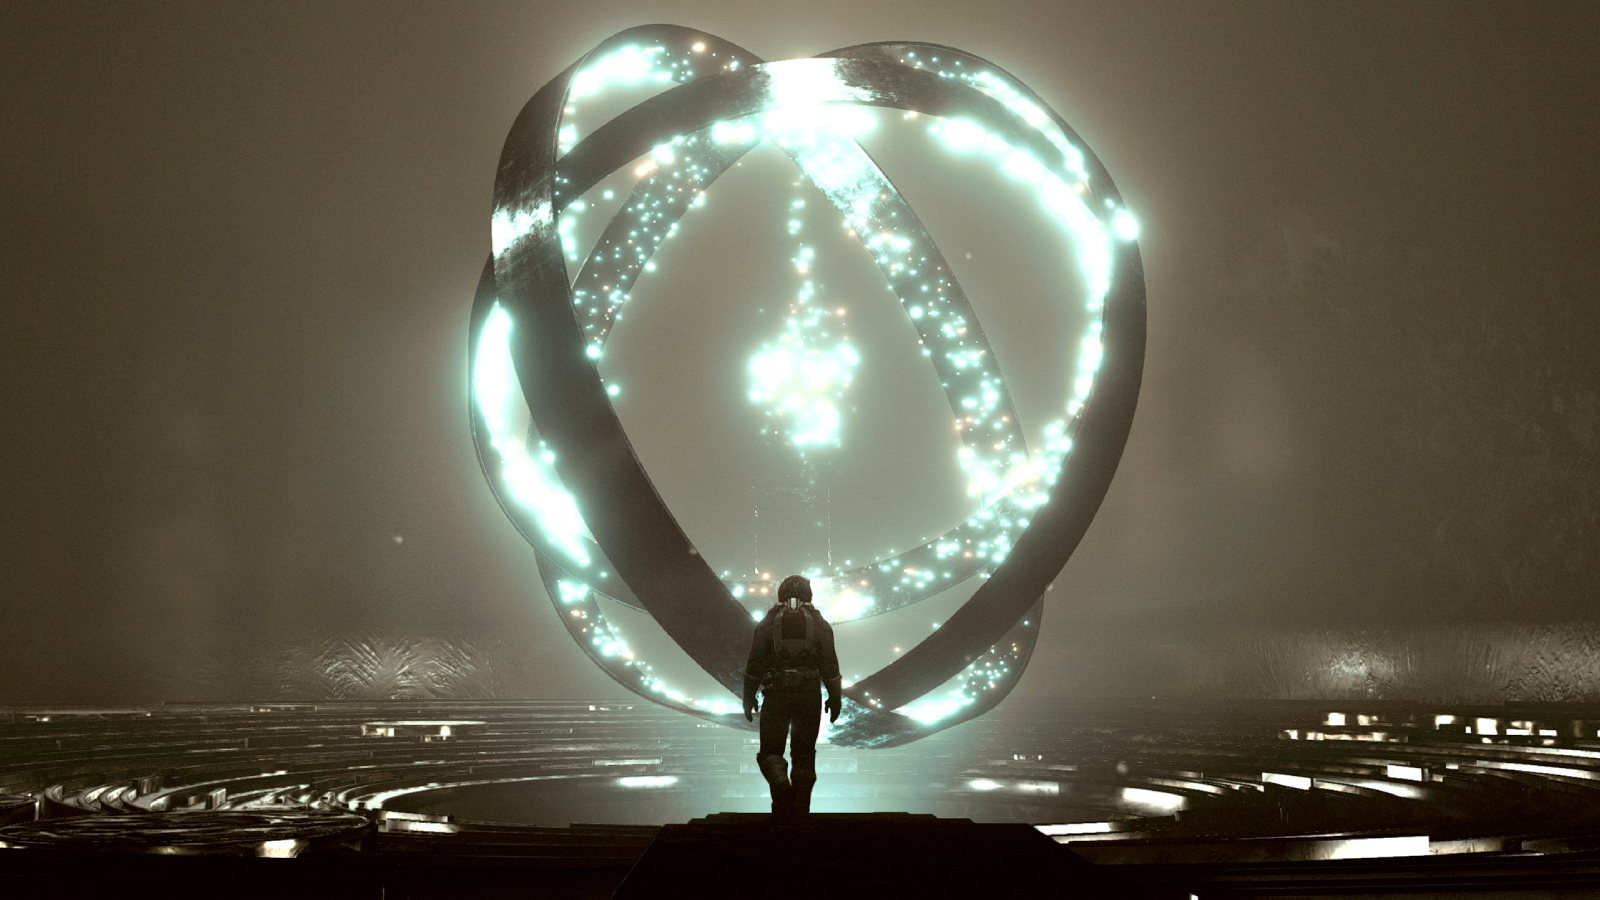 Starfield Preload is Now Available on Steam! Players See Variation in  Download Size - EIP Gaming